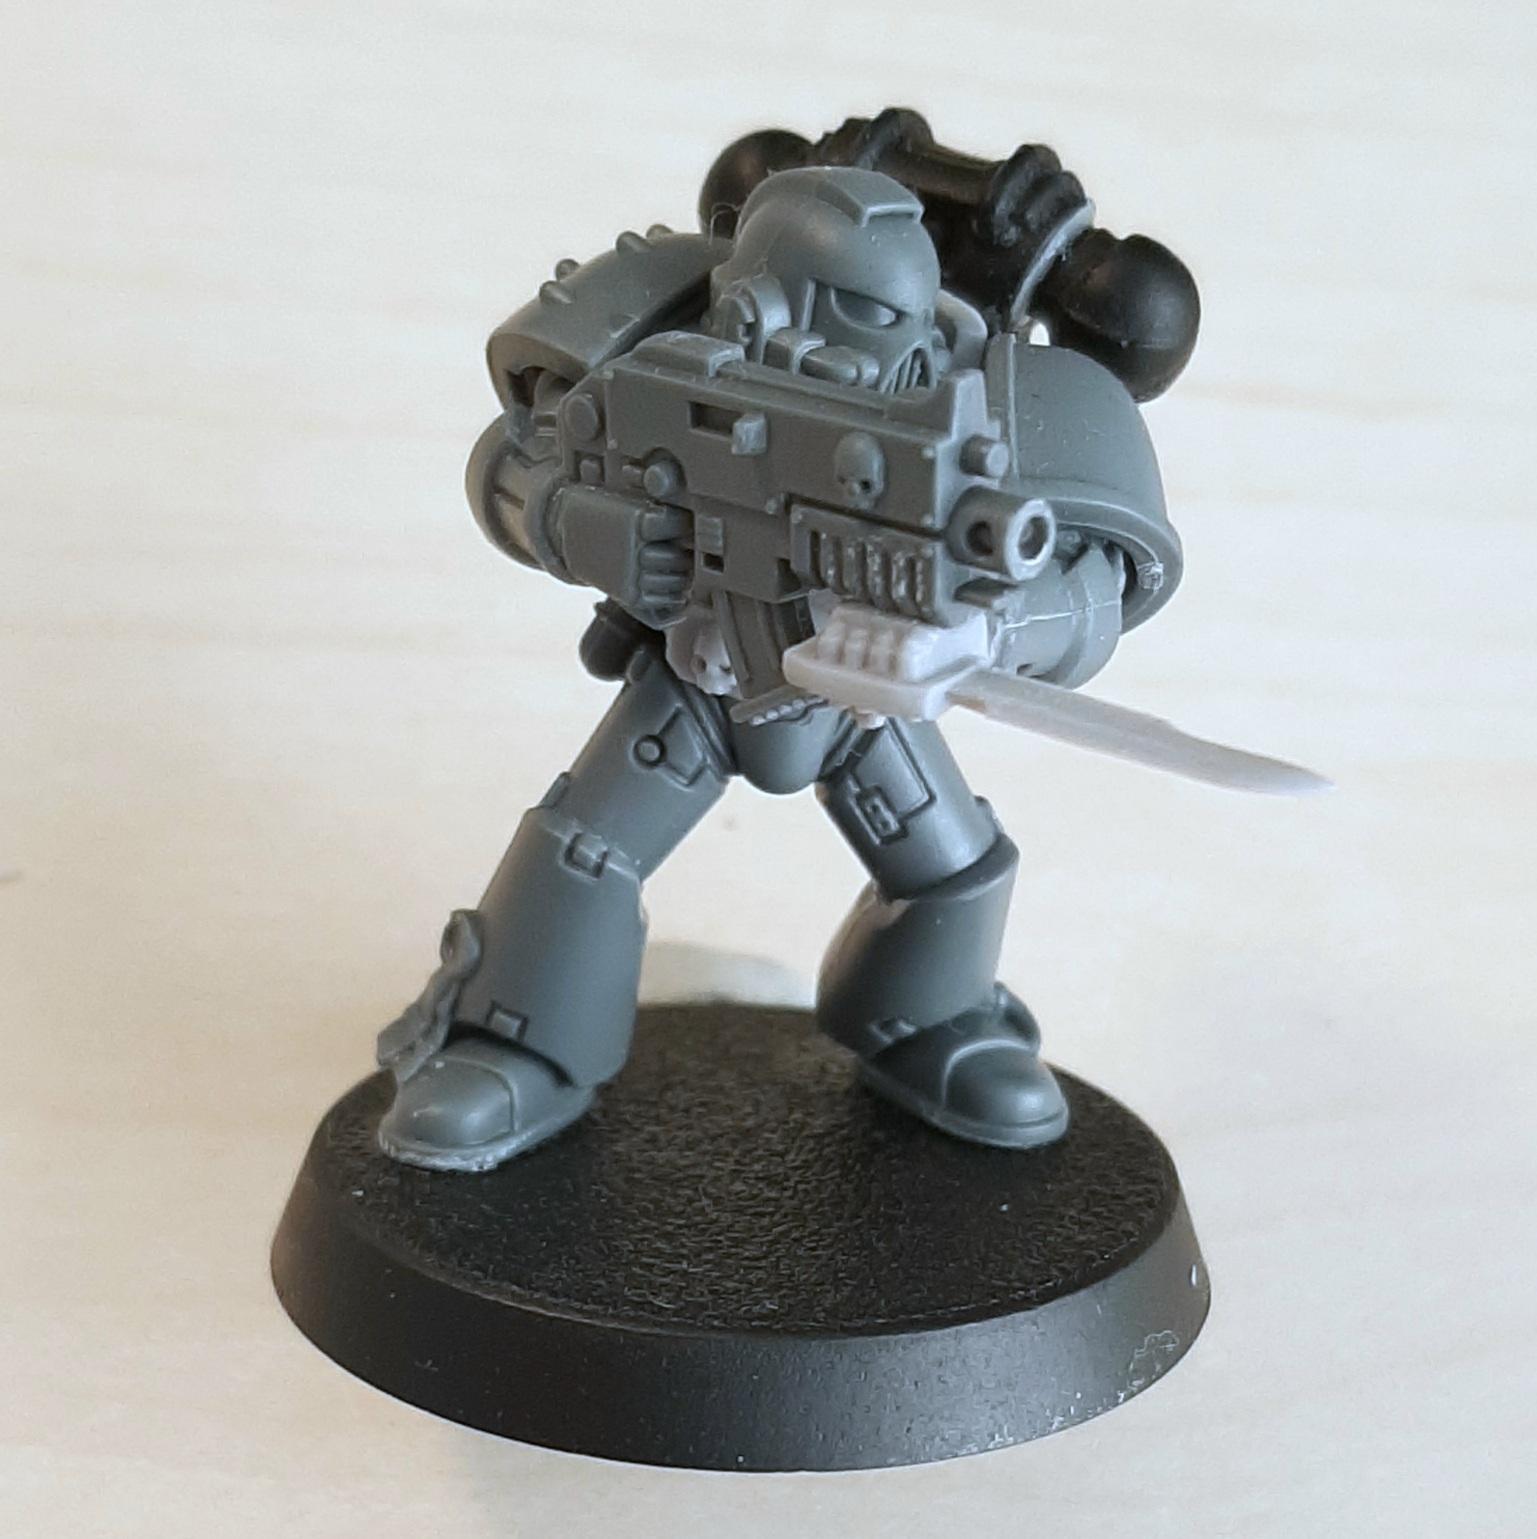 Army, Assault, Bolter, Boltgun, Chalice, Cold, Conversion, Custom, Drinkers, Excommunicate, Fast, Free, Kelch, Kitbash, Mutant, Mutation, Renegade, Seelentrinker, Soul, Space, Space Marines, Squad, Tactical, Traitor